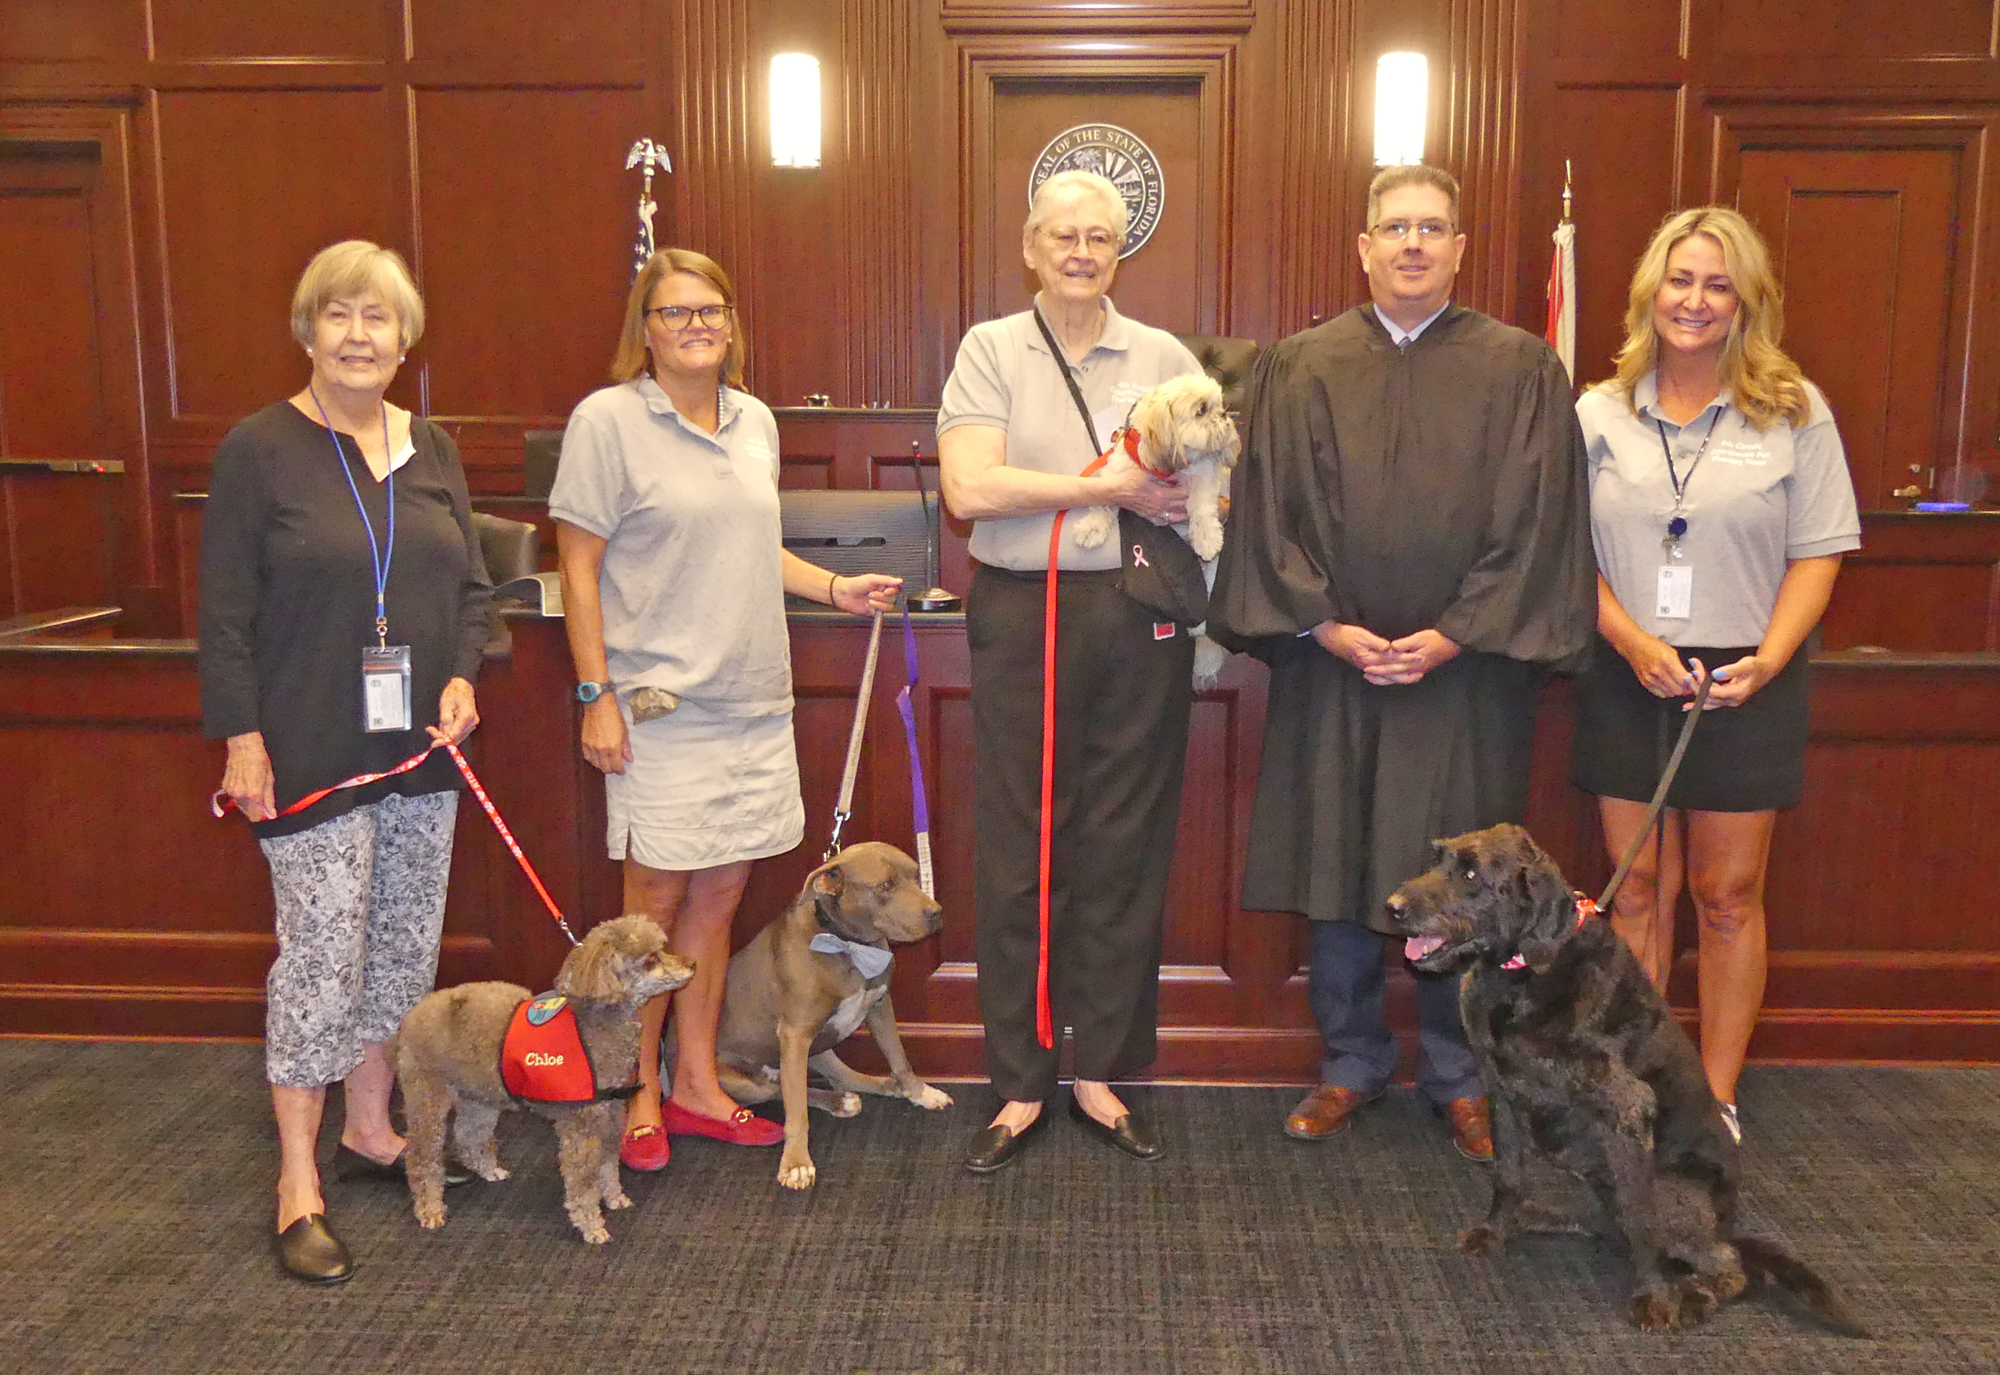 From left, Carole Scanlon and Chloe, Elizabeth Wallace and Mr. Vito, Sylvia Osewalt and Missy, Circuit Judge Mark Borello and Rebecca Burchell and Purdy.